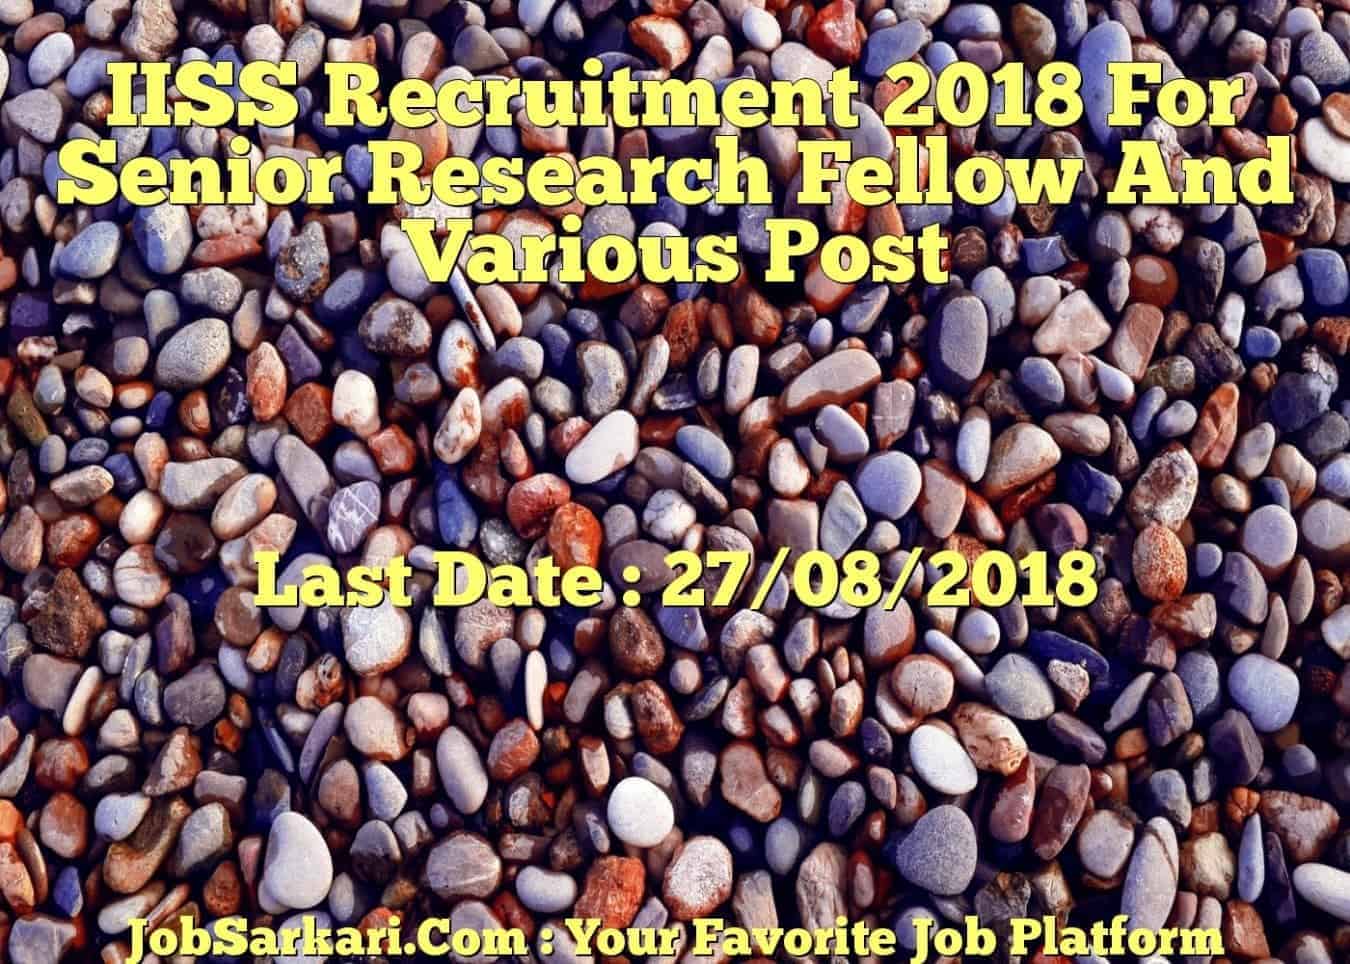 IISS Recruitment 2018 For Senior Research Fellow And Various Post